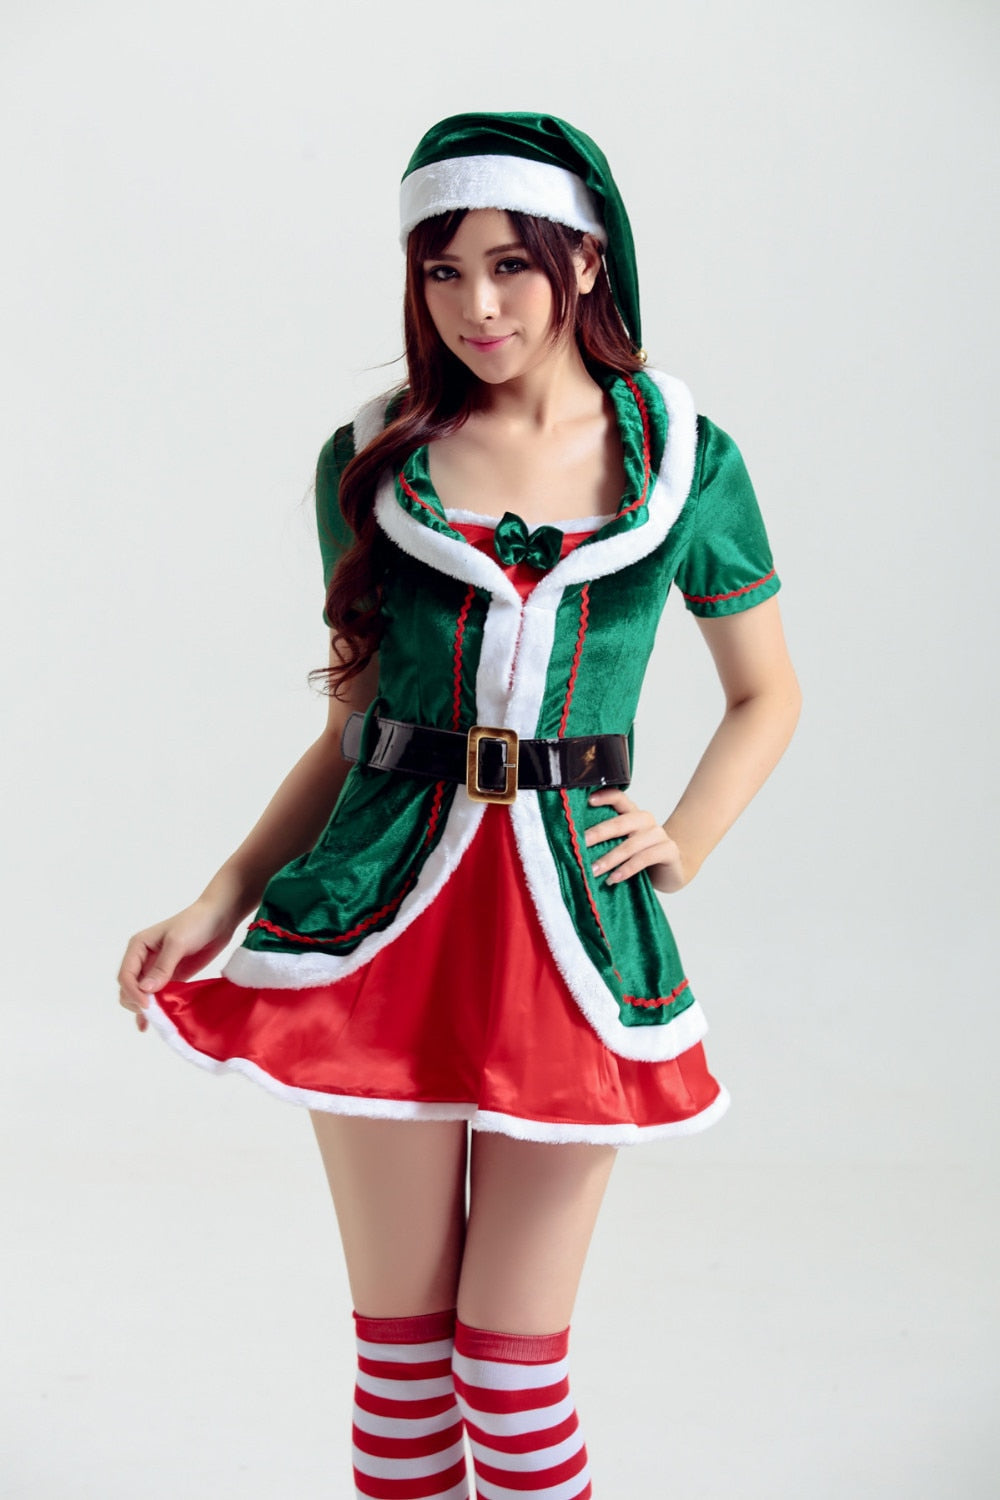 Deluxe Adult Sexy Women Santa Clause Costume Christmas Mini Dress Green Elf Xmas Home Party Costume